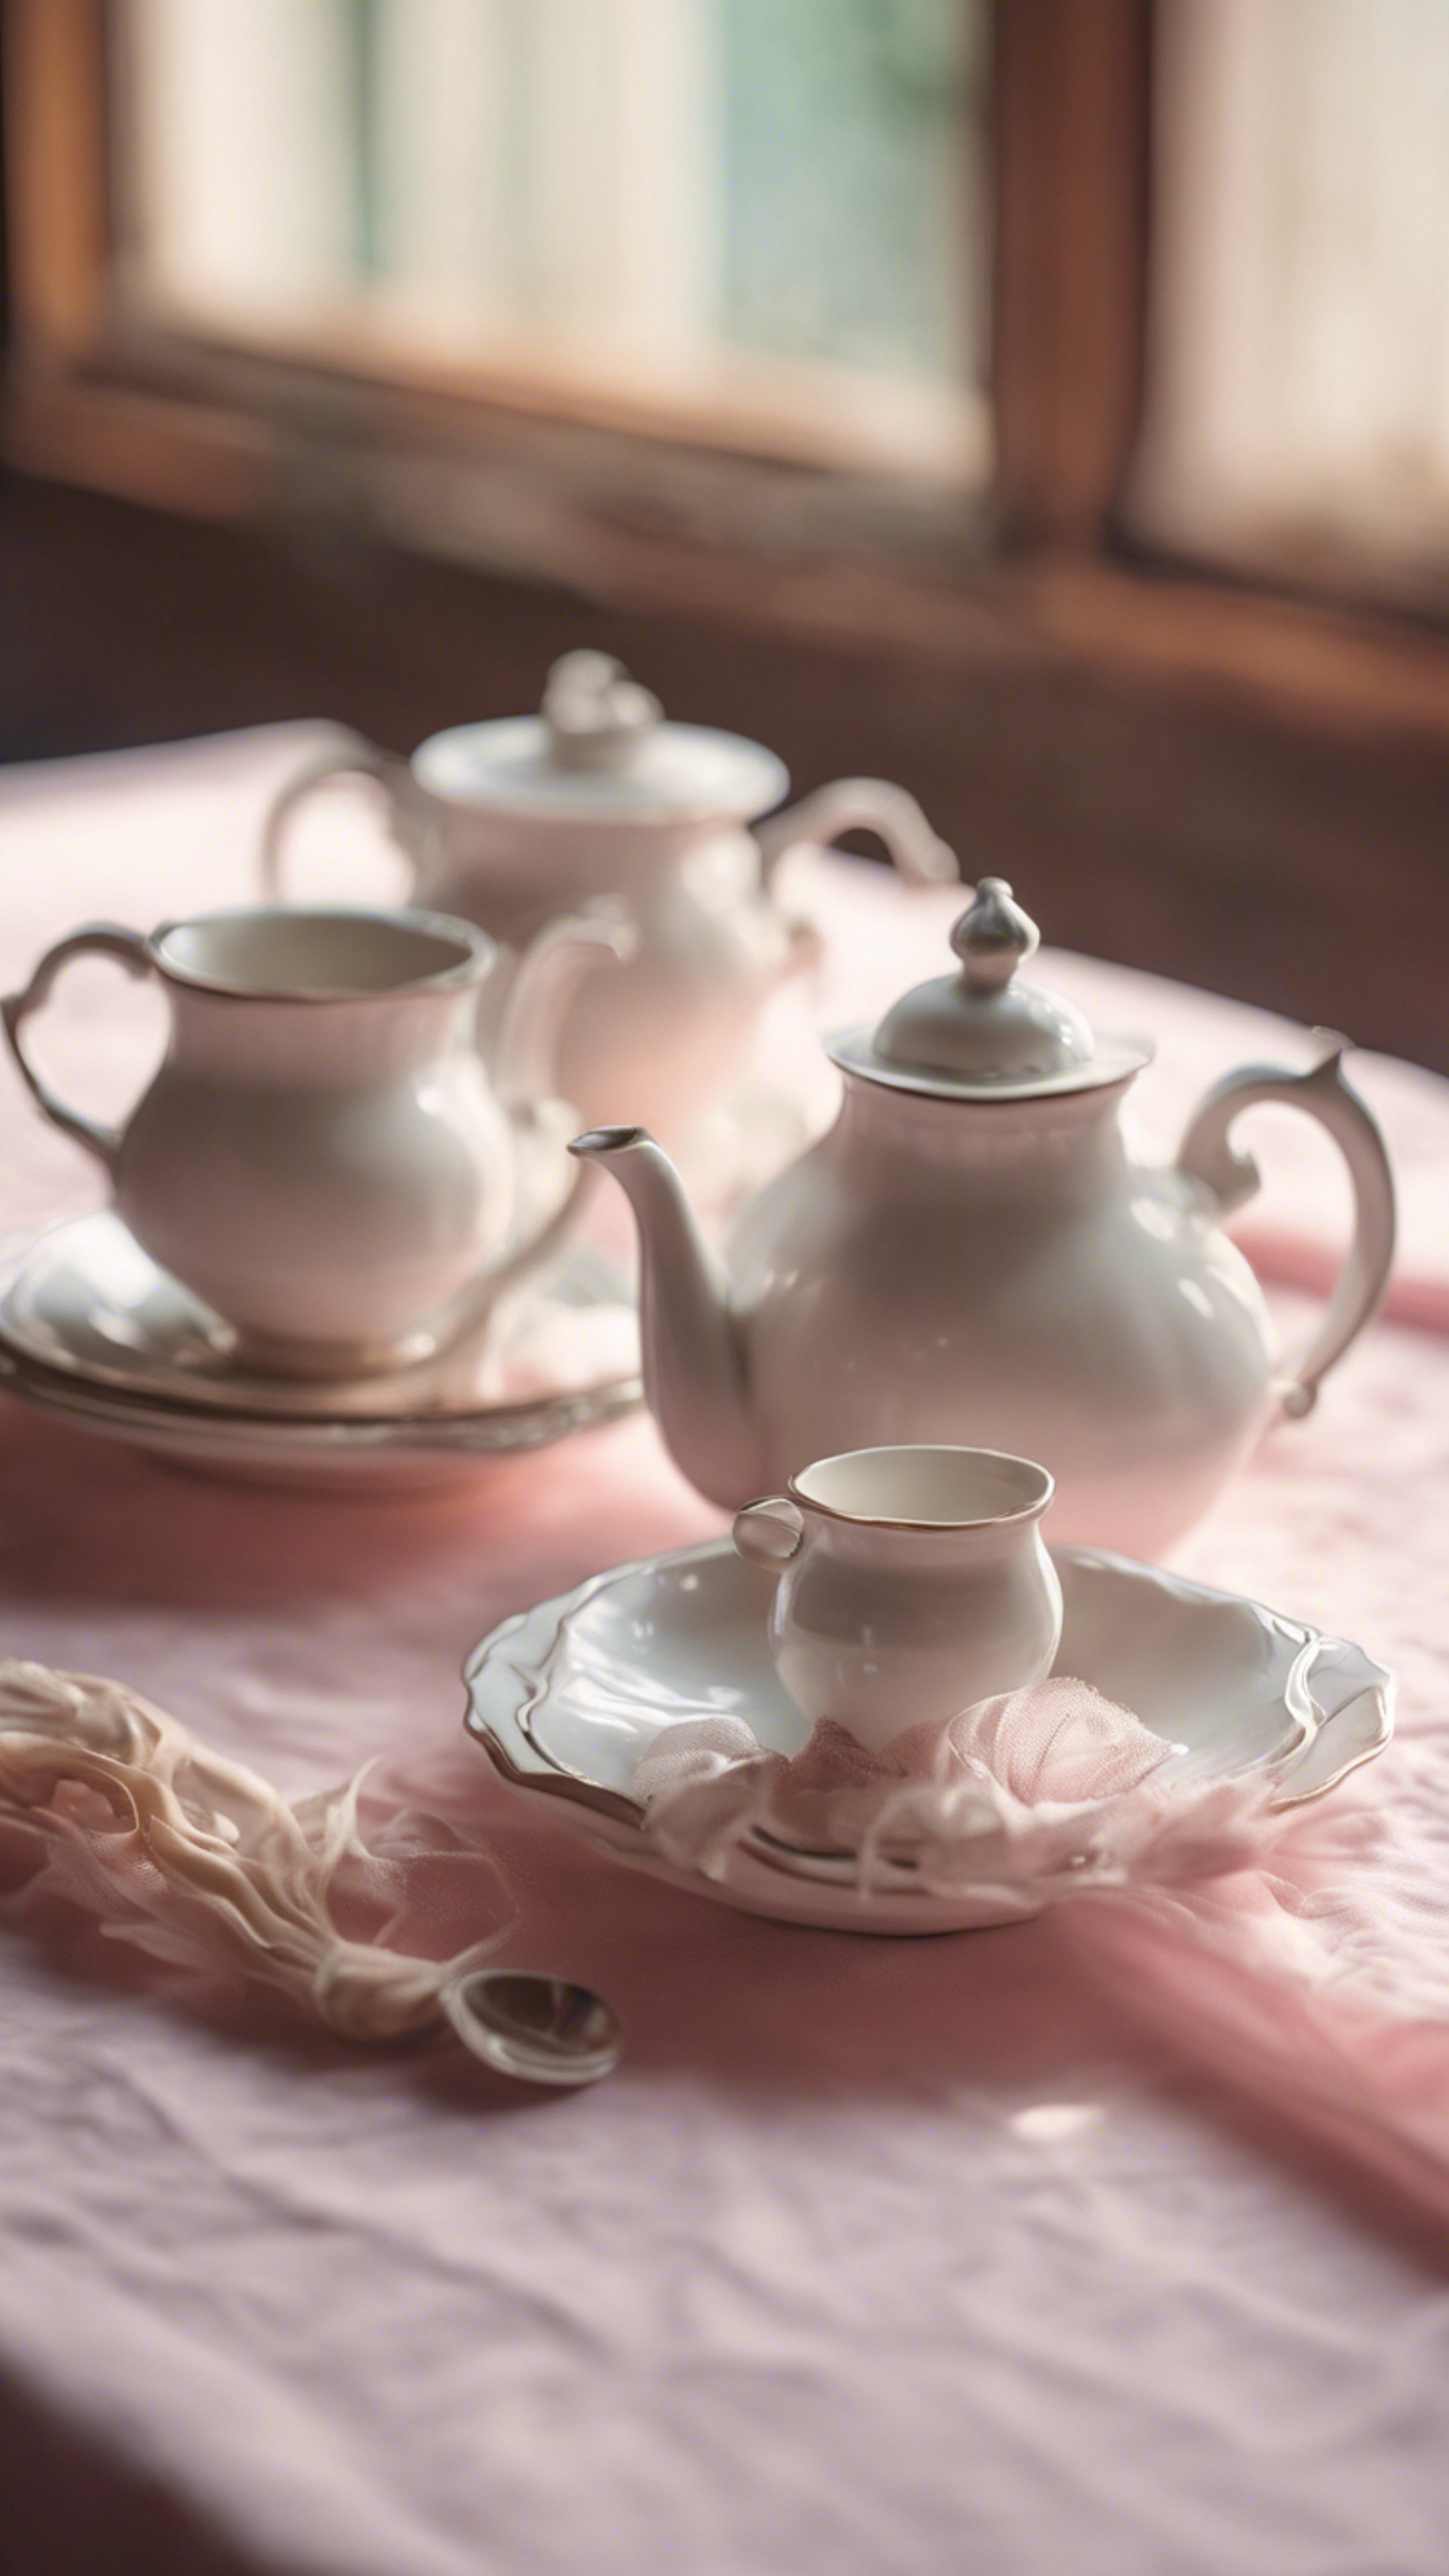 A vintage white tea set, arranged on a fluffy pastel pink tablecloth in a charming, old-world kitchen. Ფონი[519305883ddb44018966]